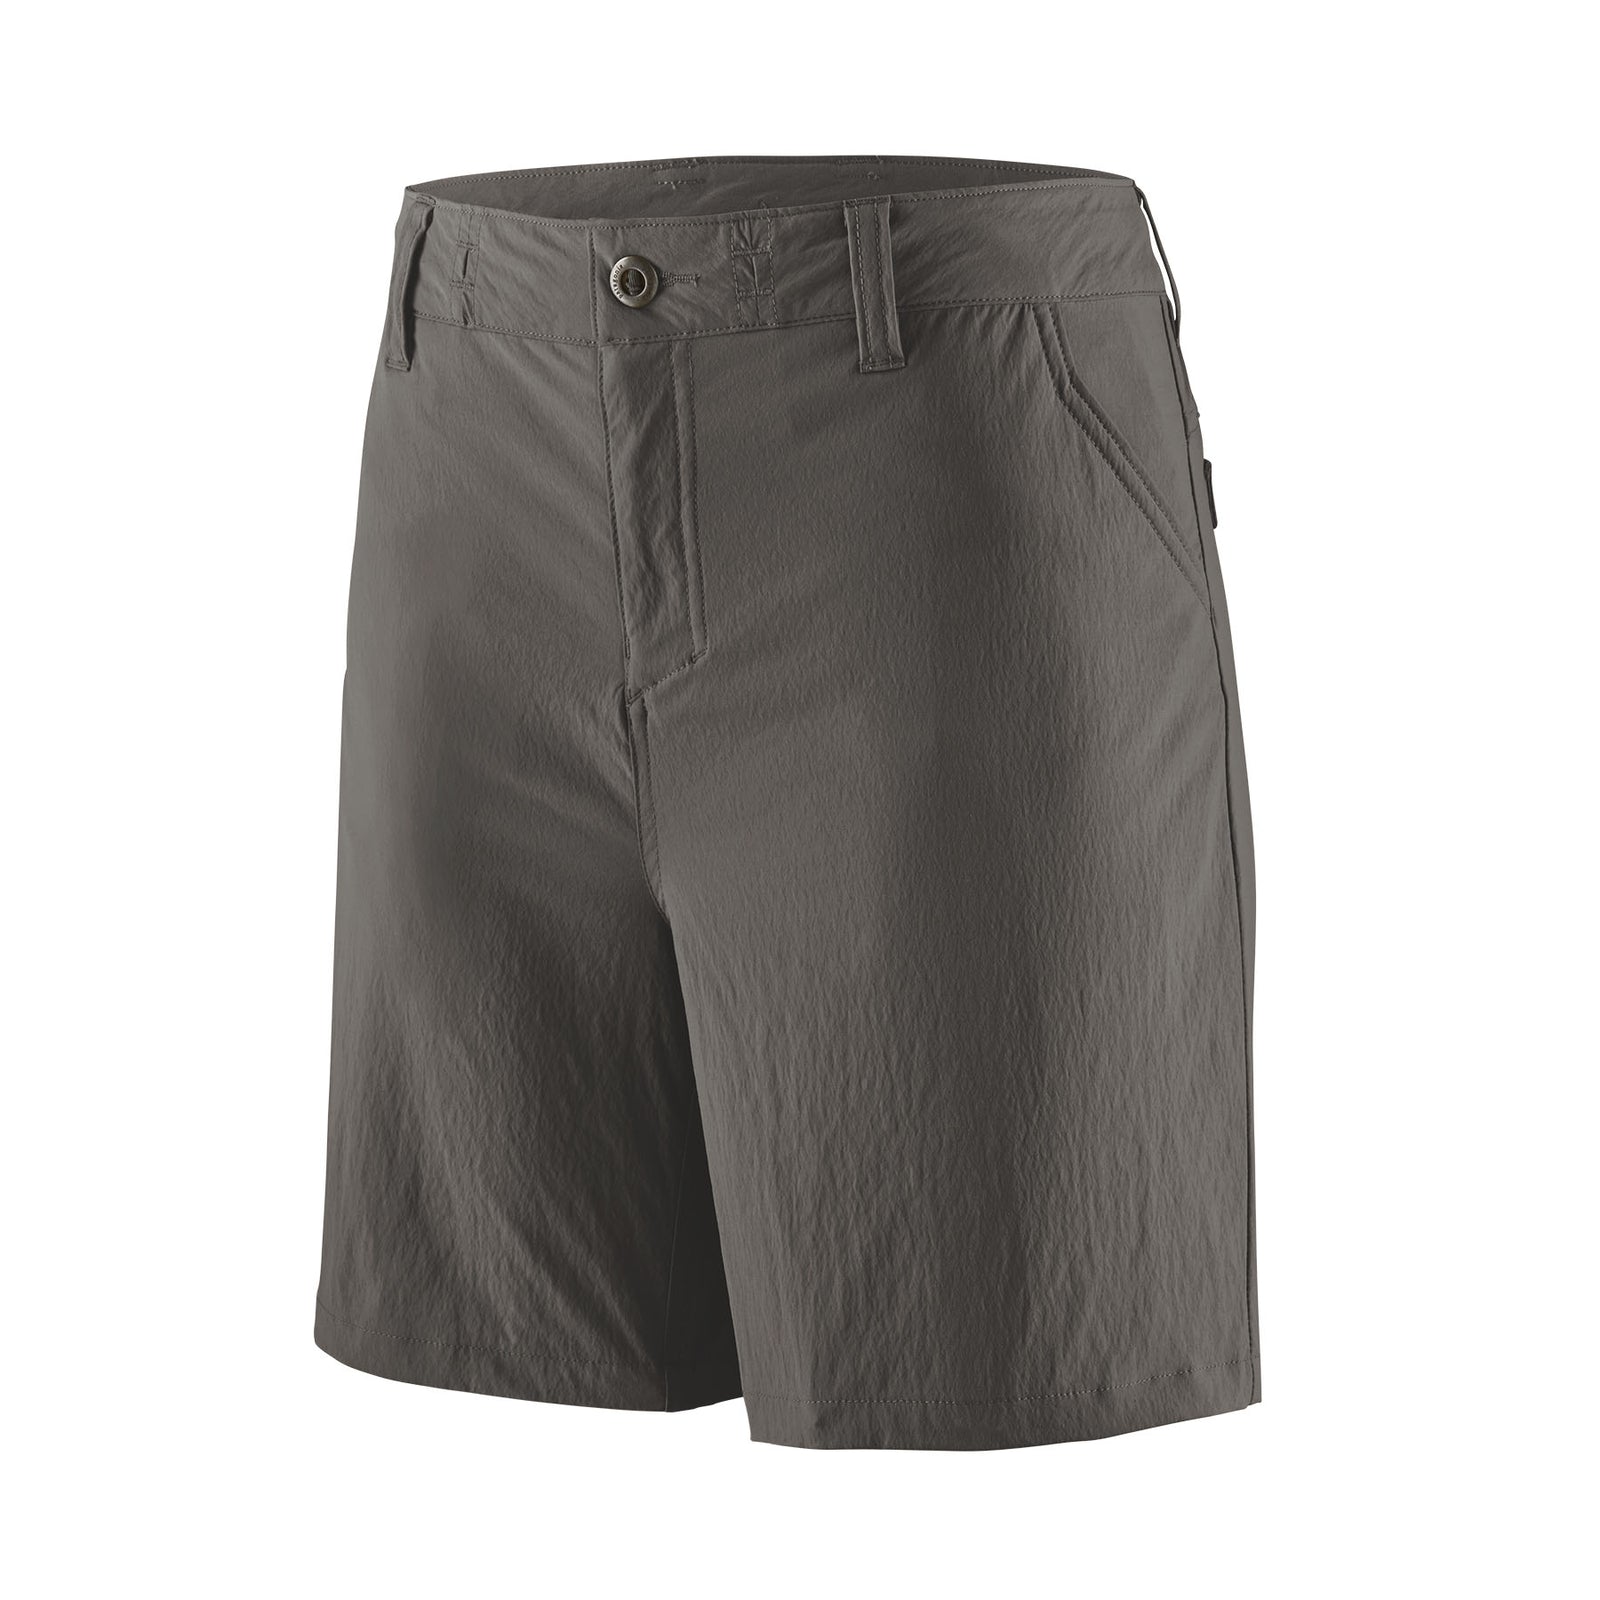 Women's Clothing Tagged Pants/Shorts - Fin & Fire Fly Shop